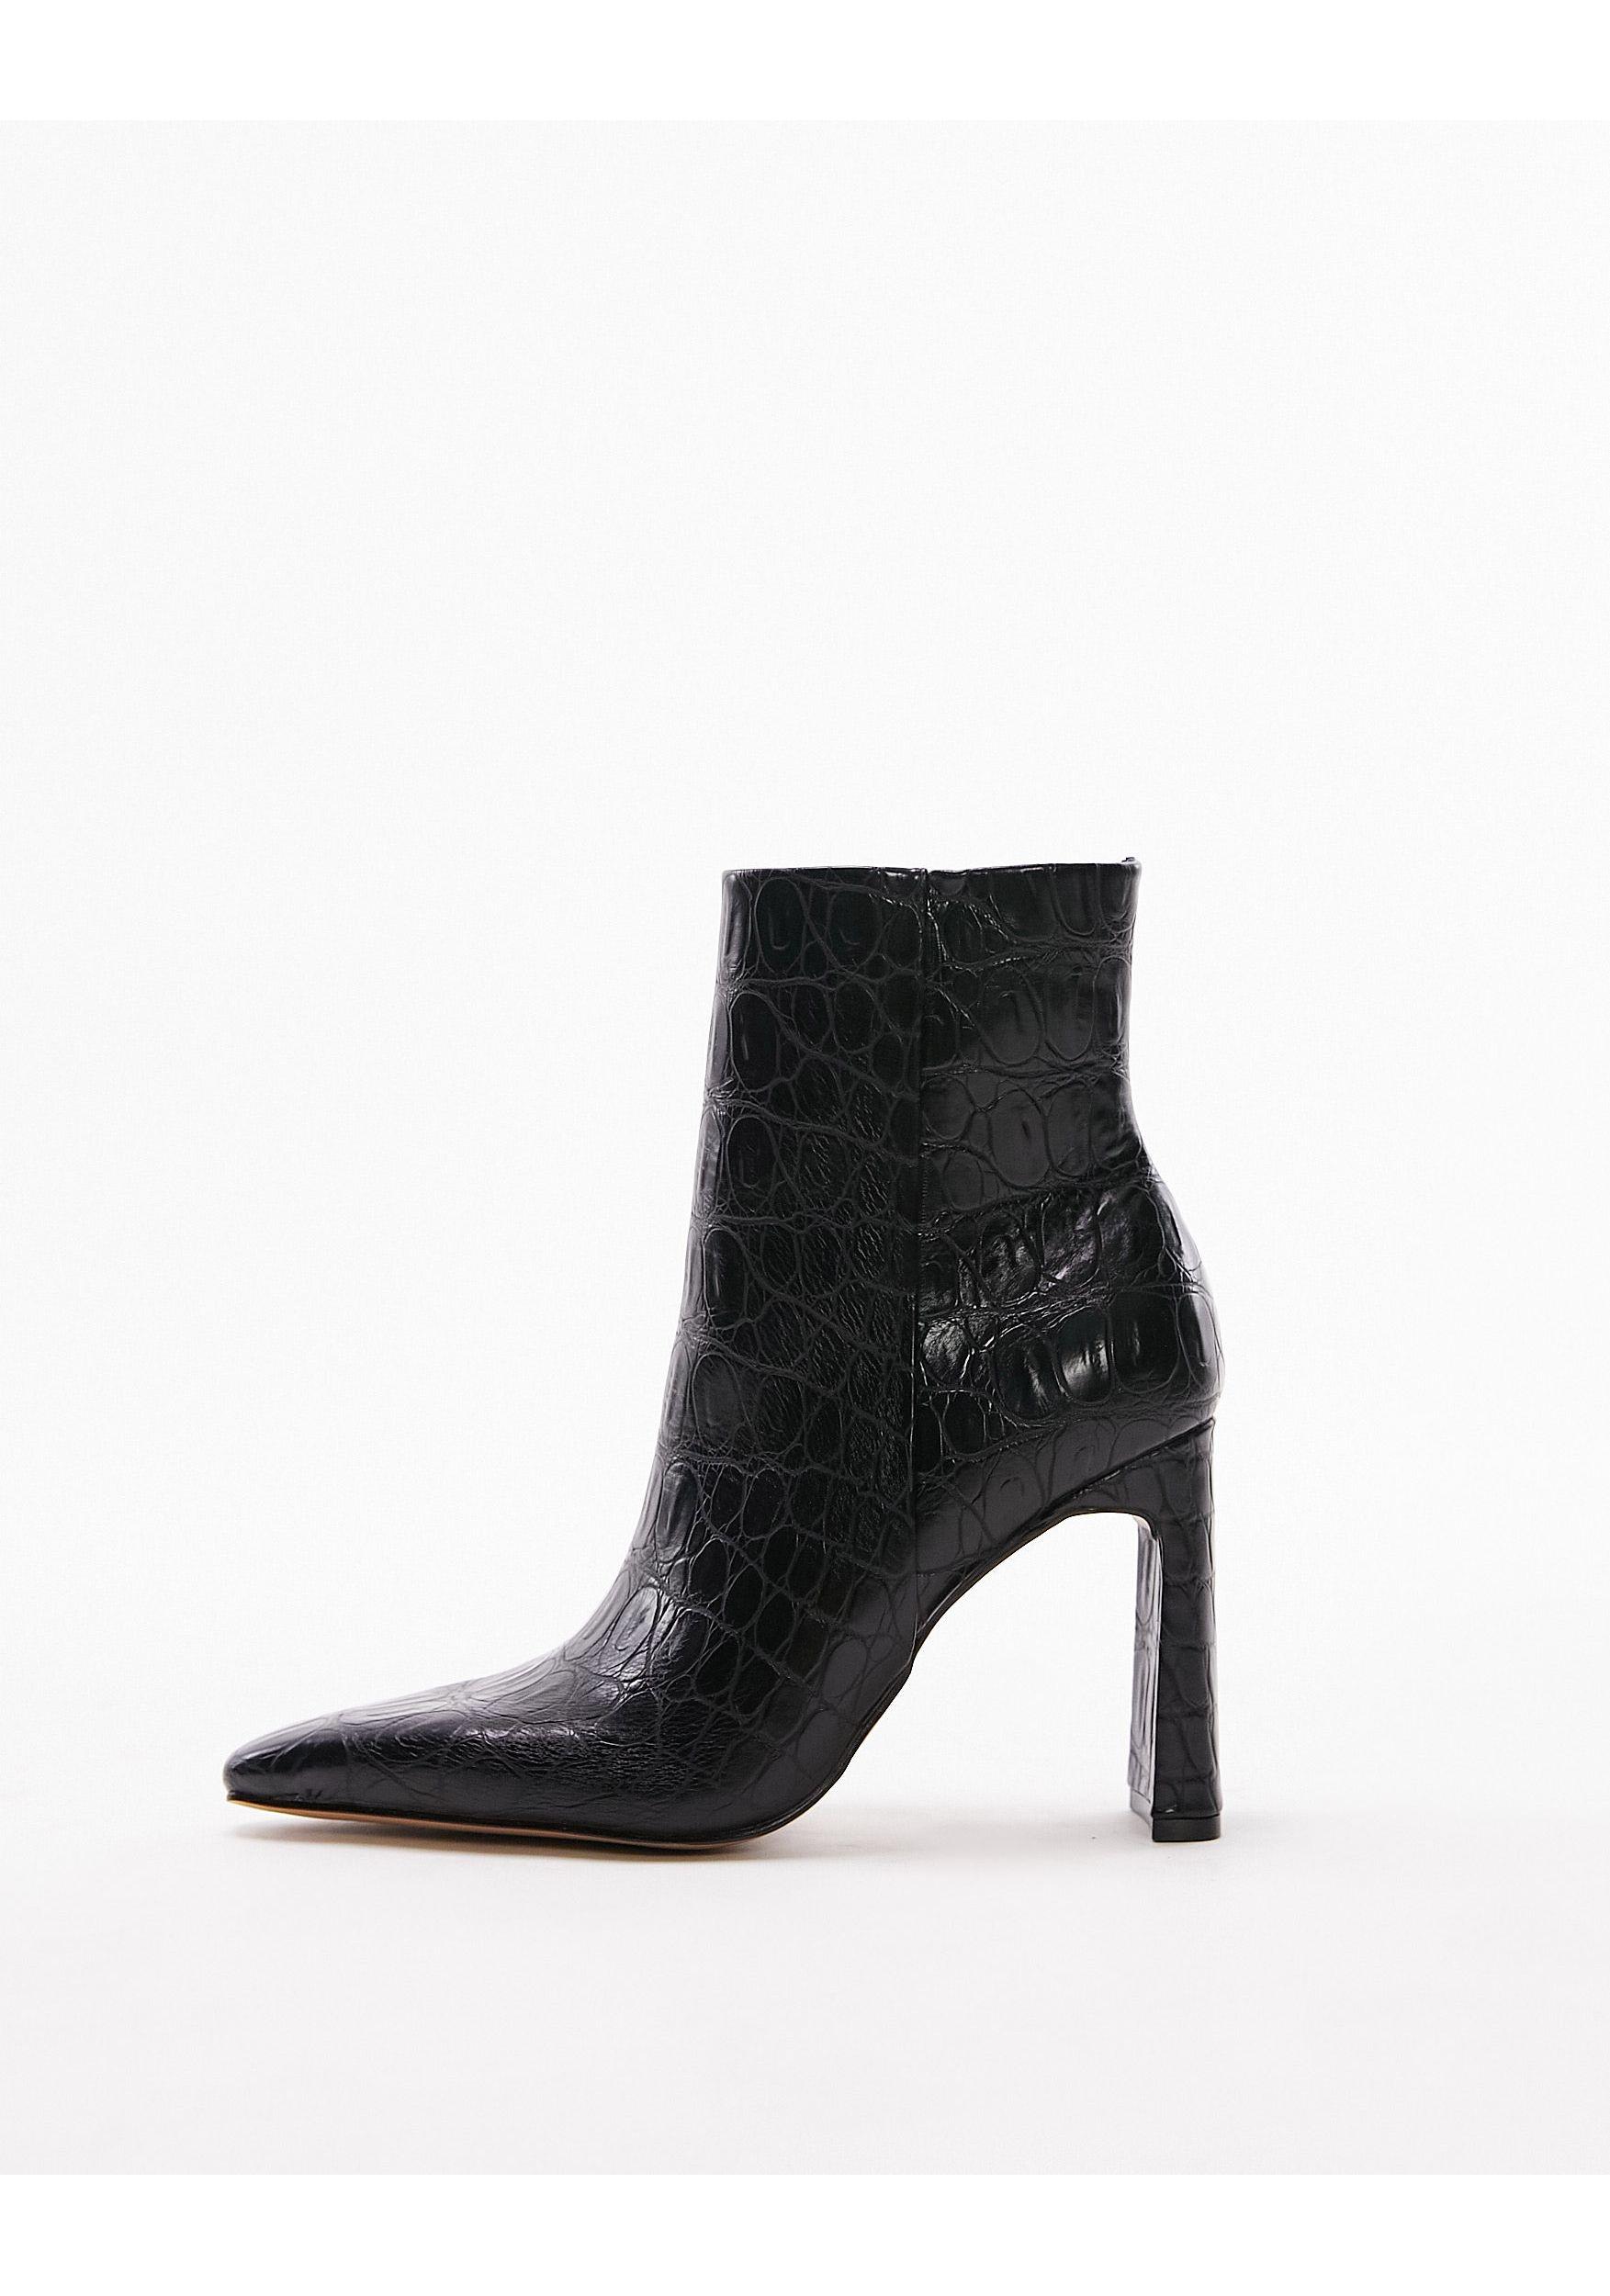 TOPSHOP Ophelia Pointed High Heel Ankle Boot in Black | Lyst